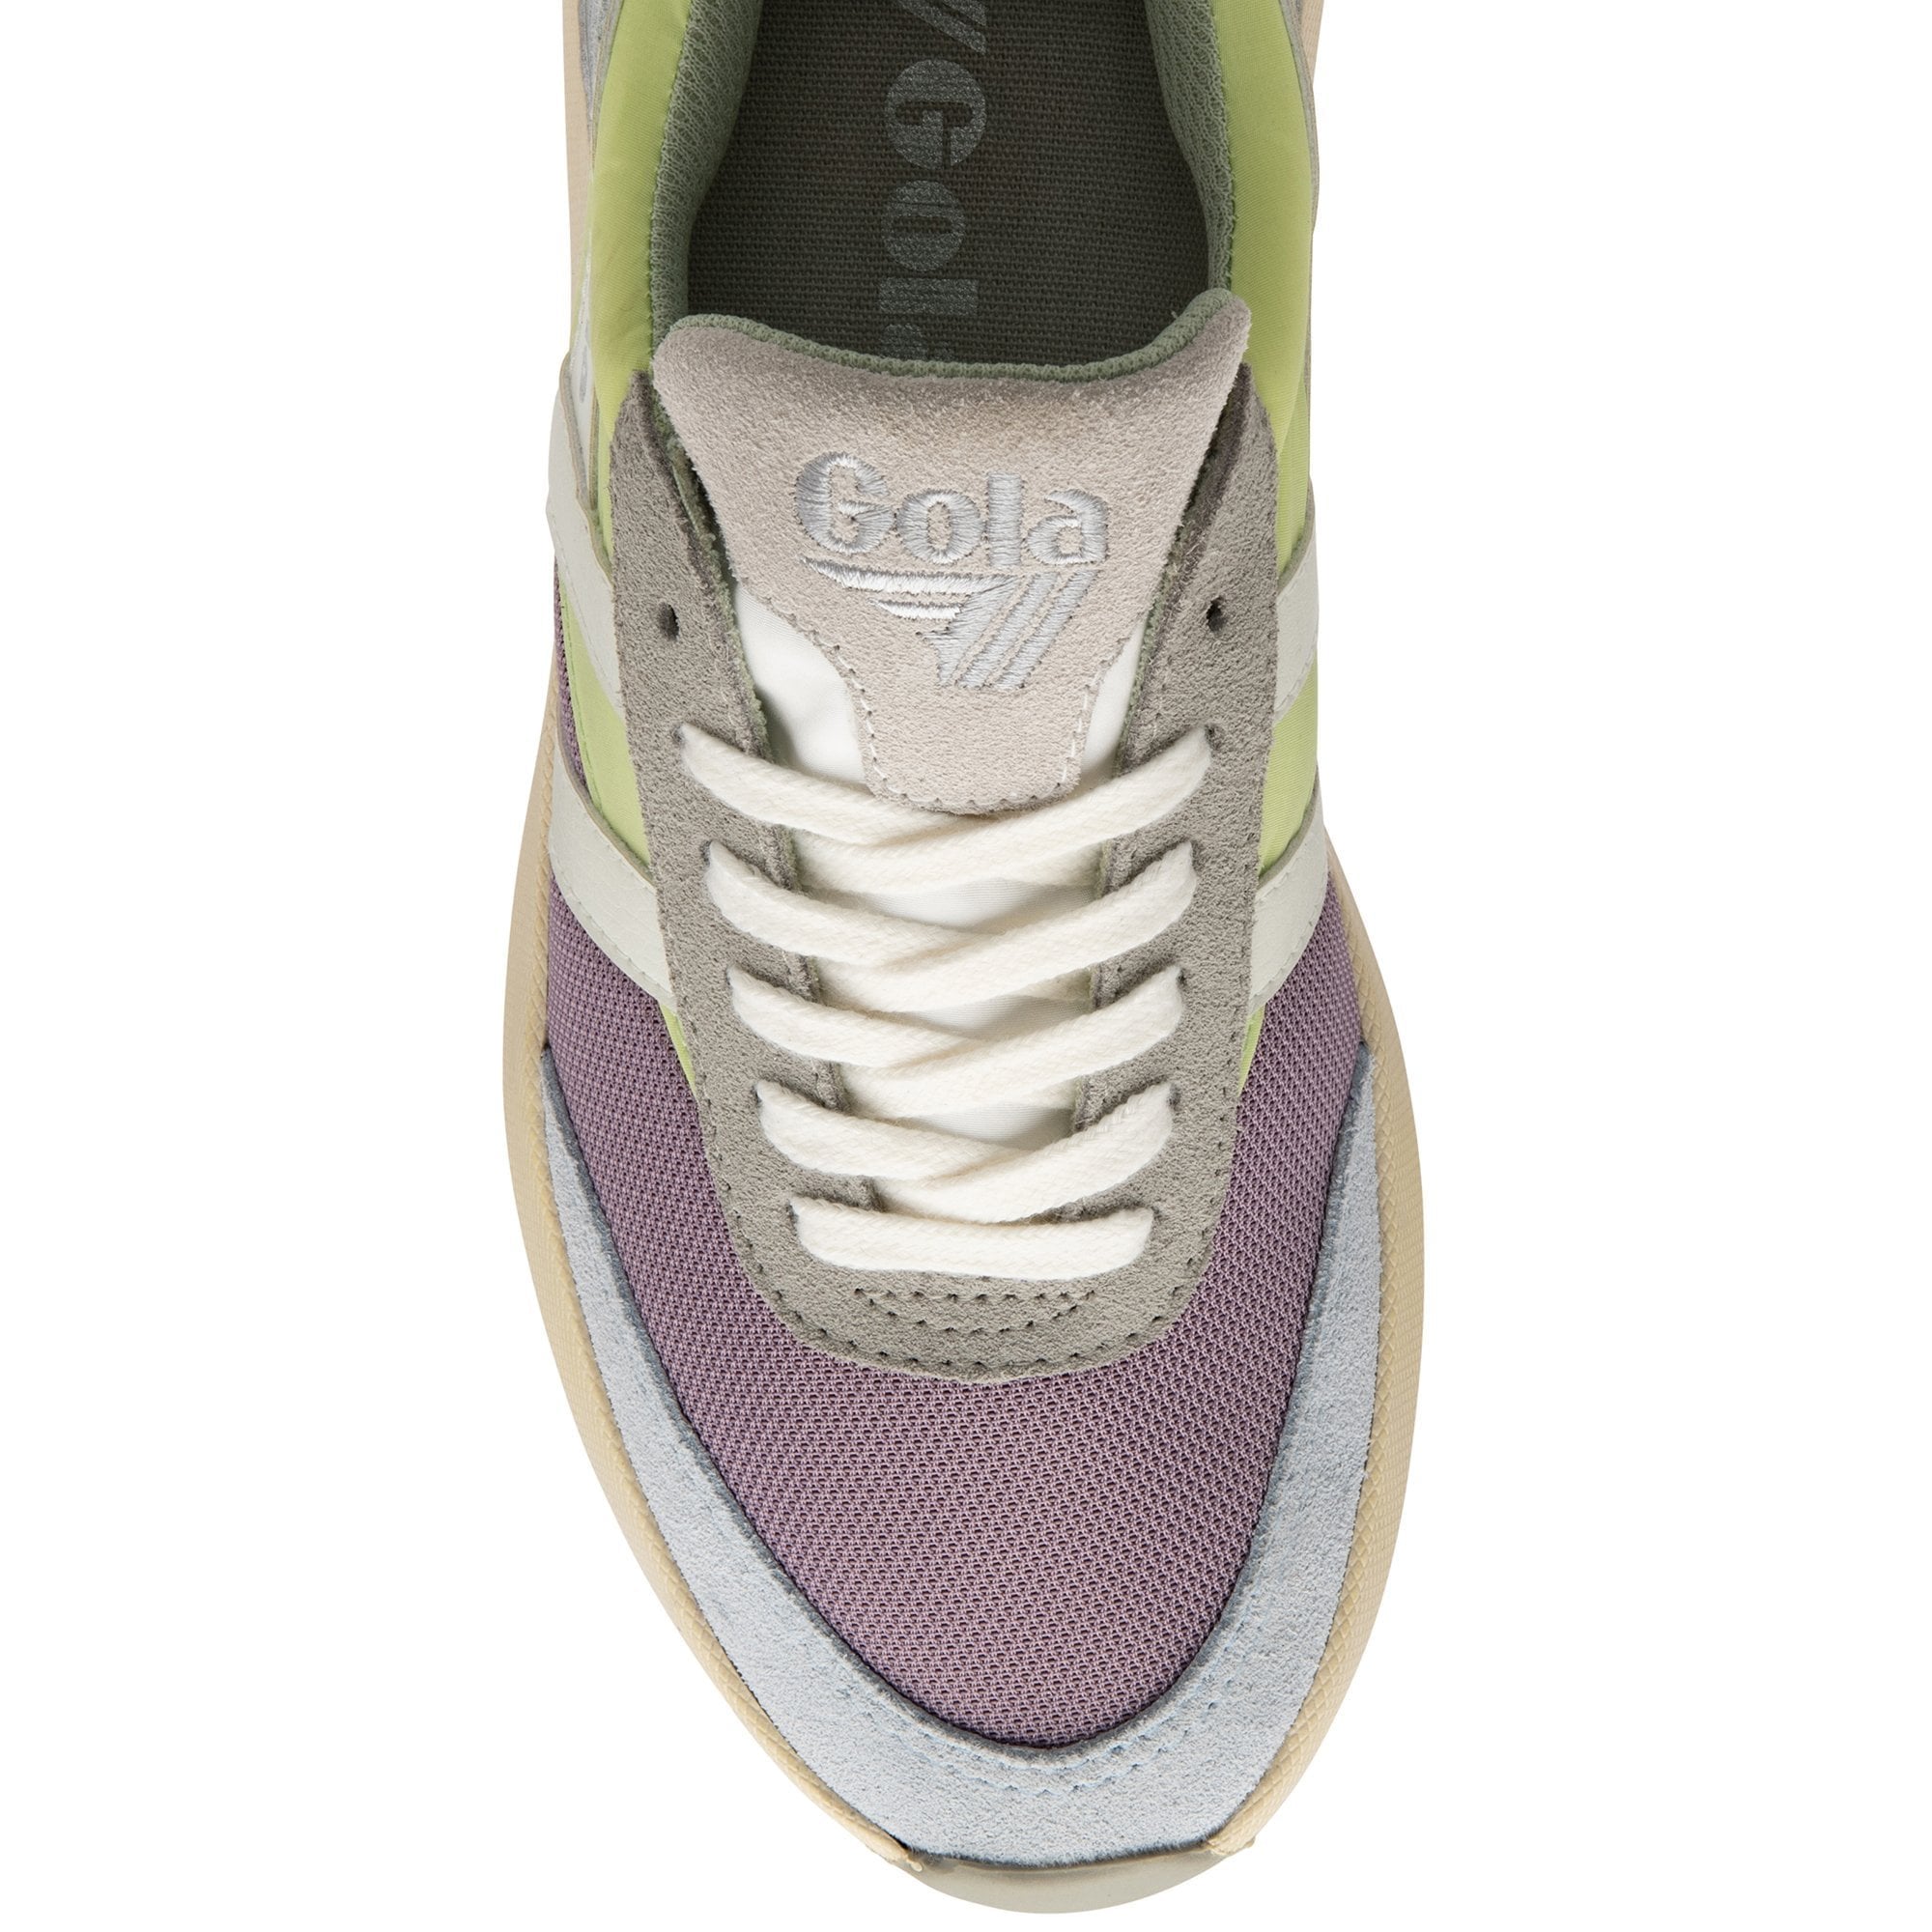 Buy Gola womens Raven sneakers in lily/patina green/ice blue at gola